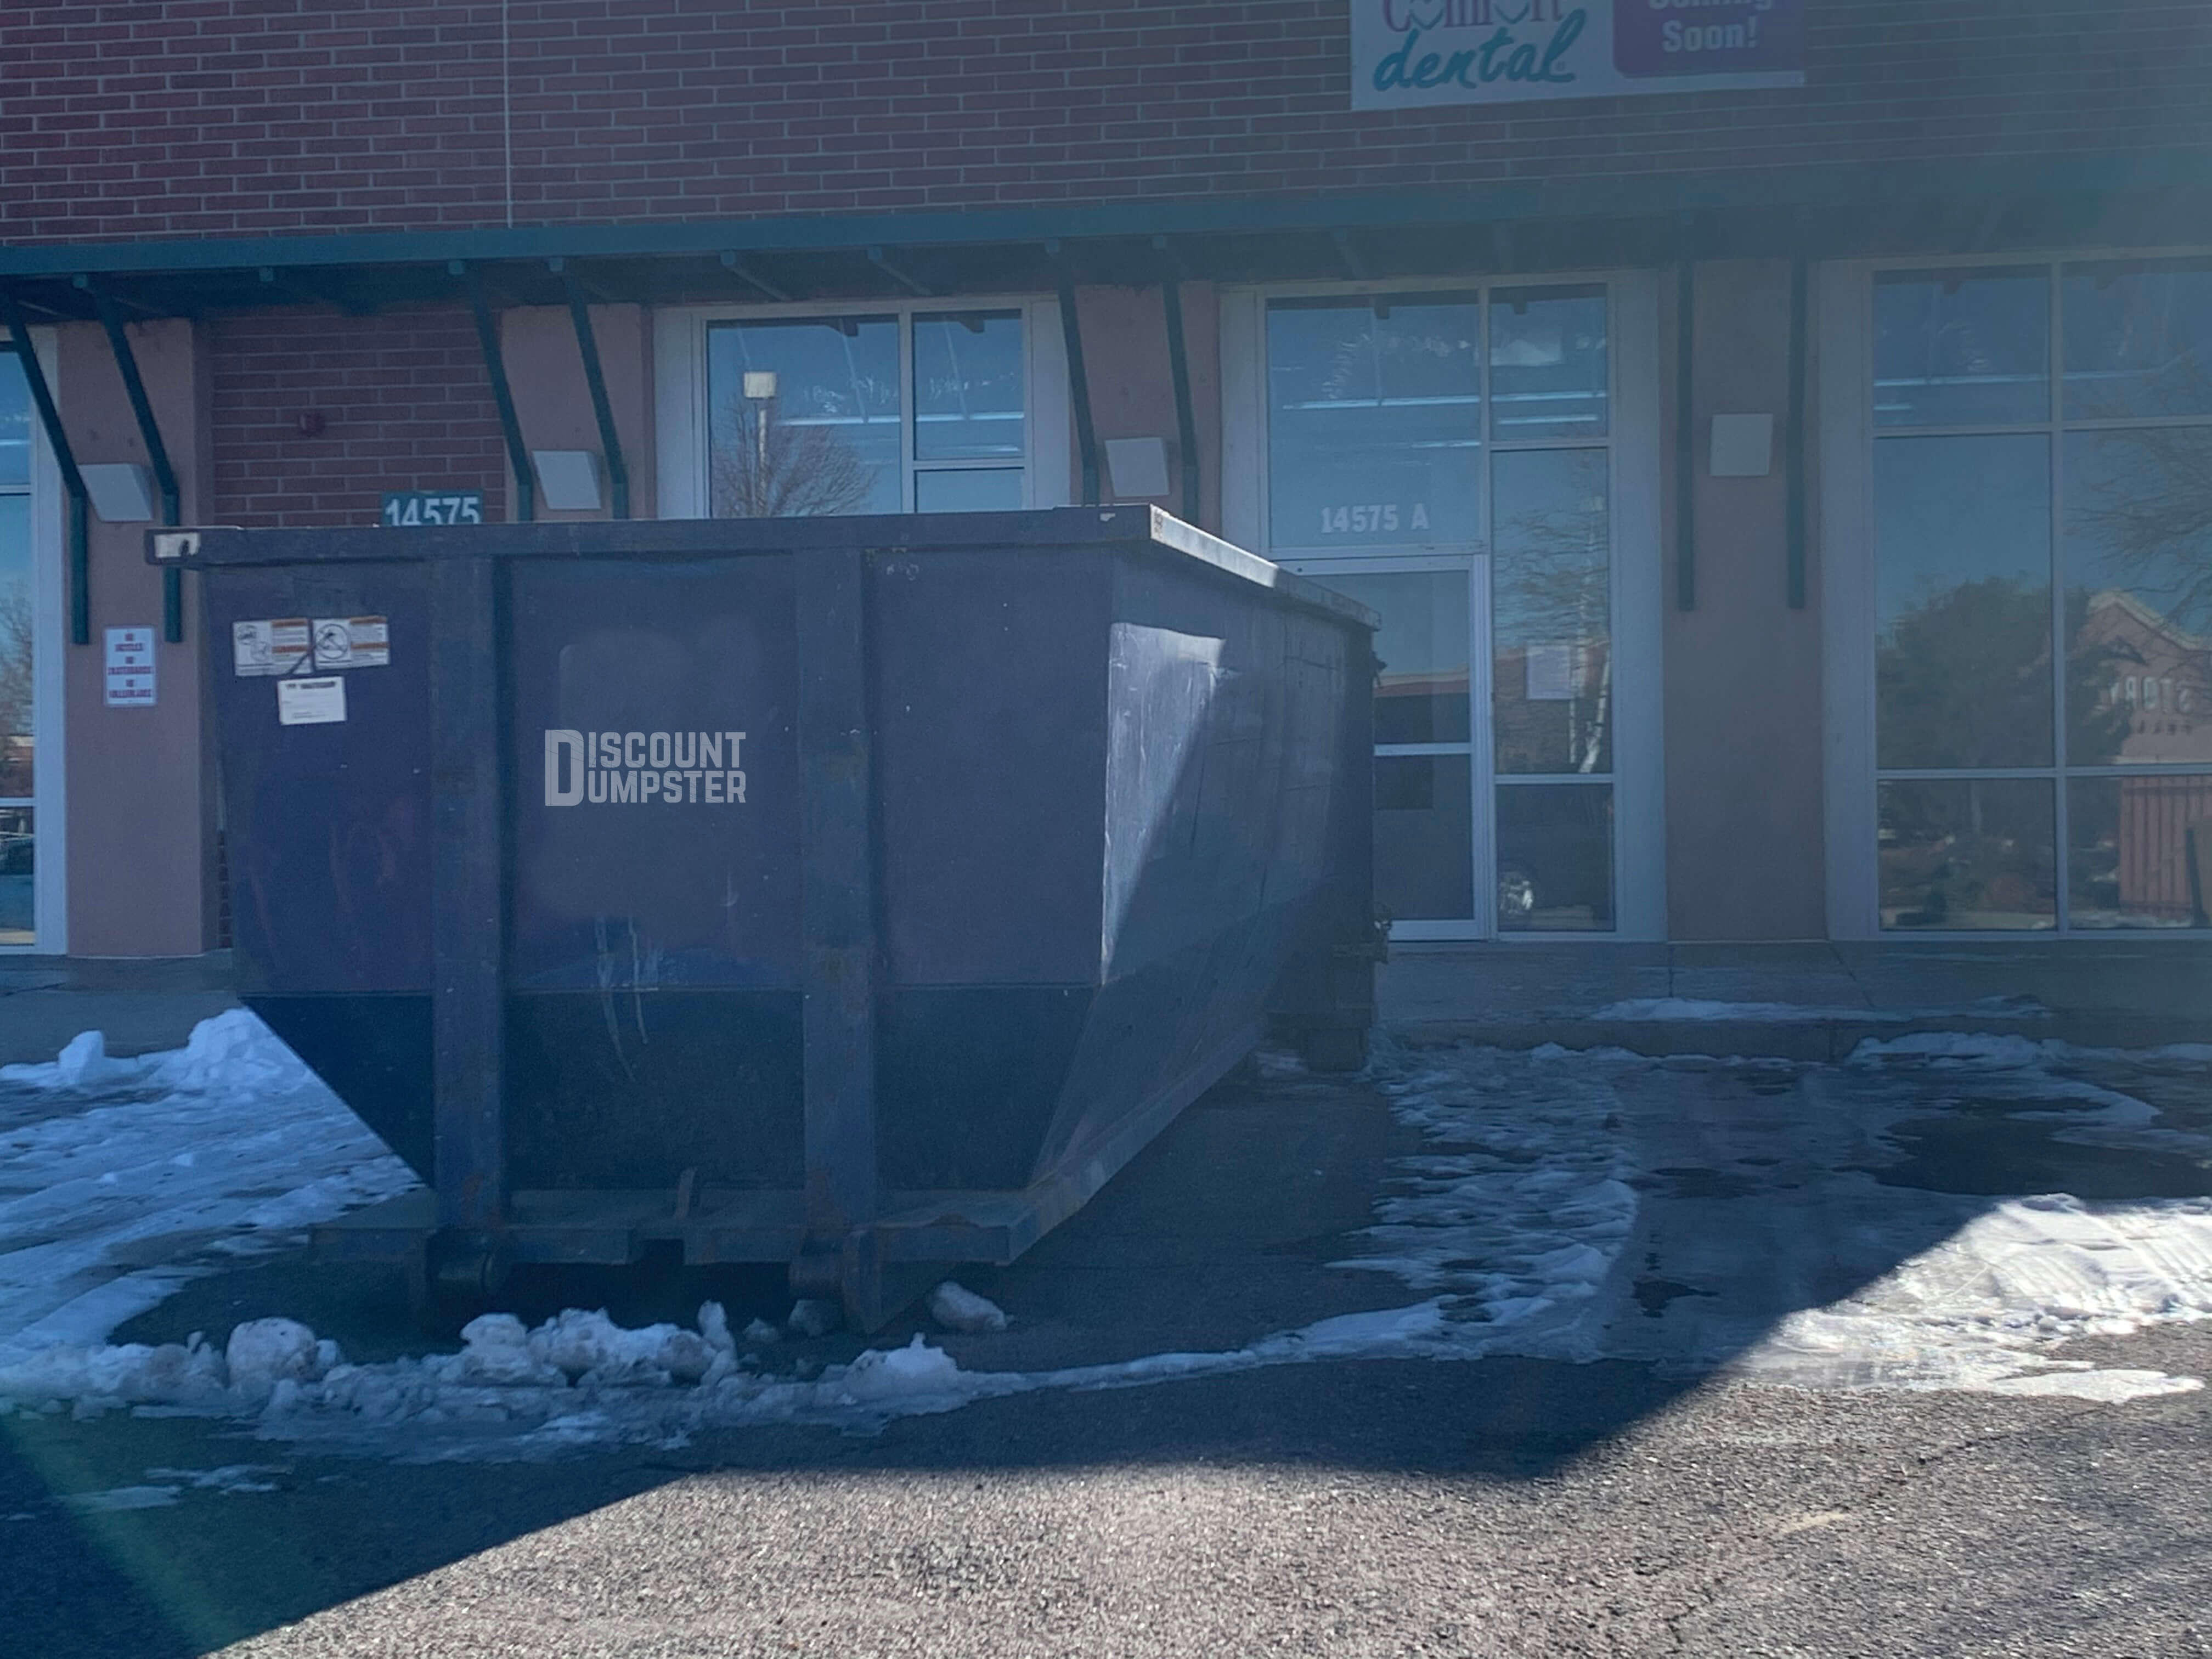 Discount dumpster can help with commercial waste removal in chicago il